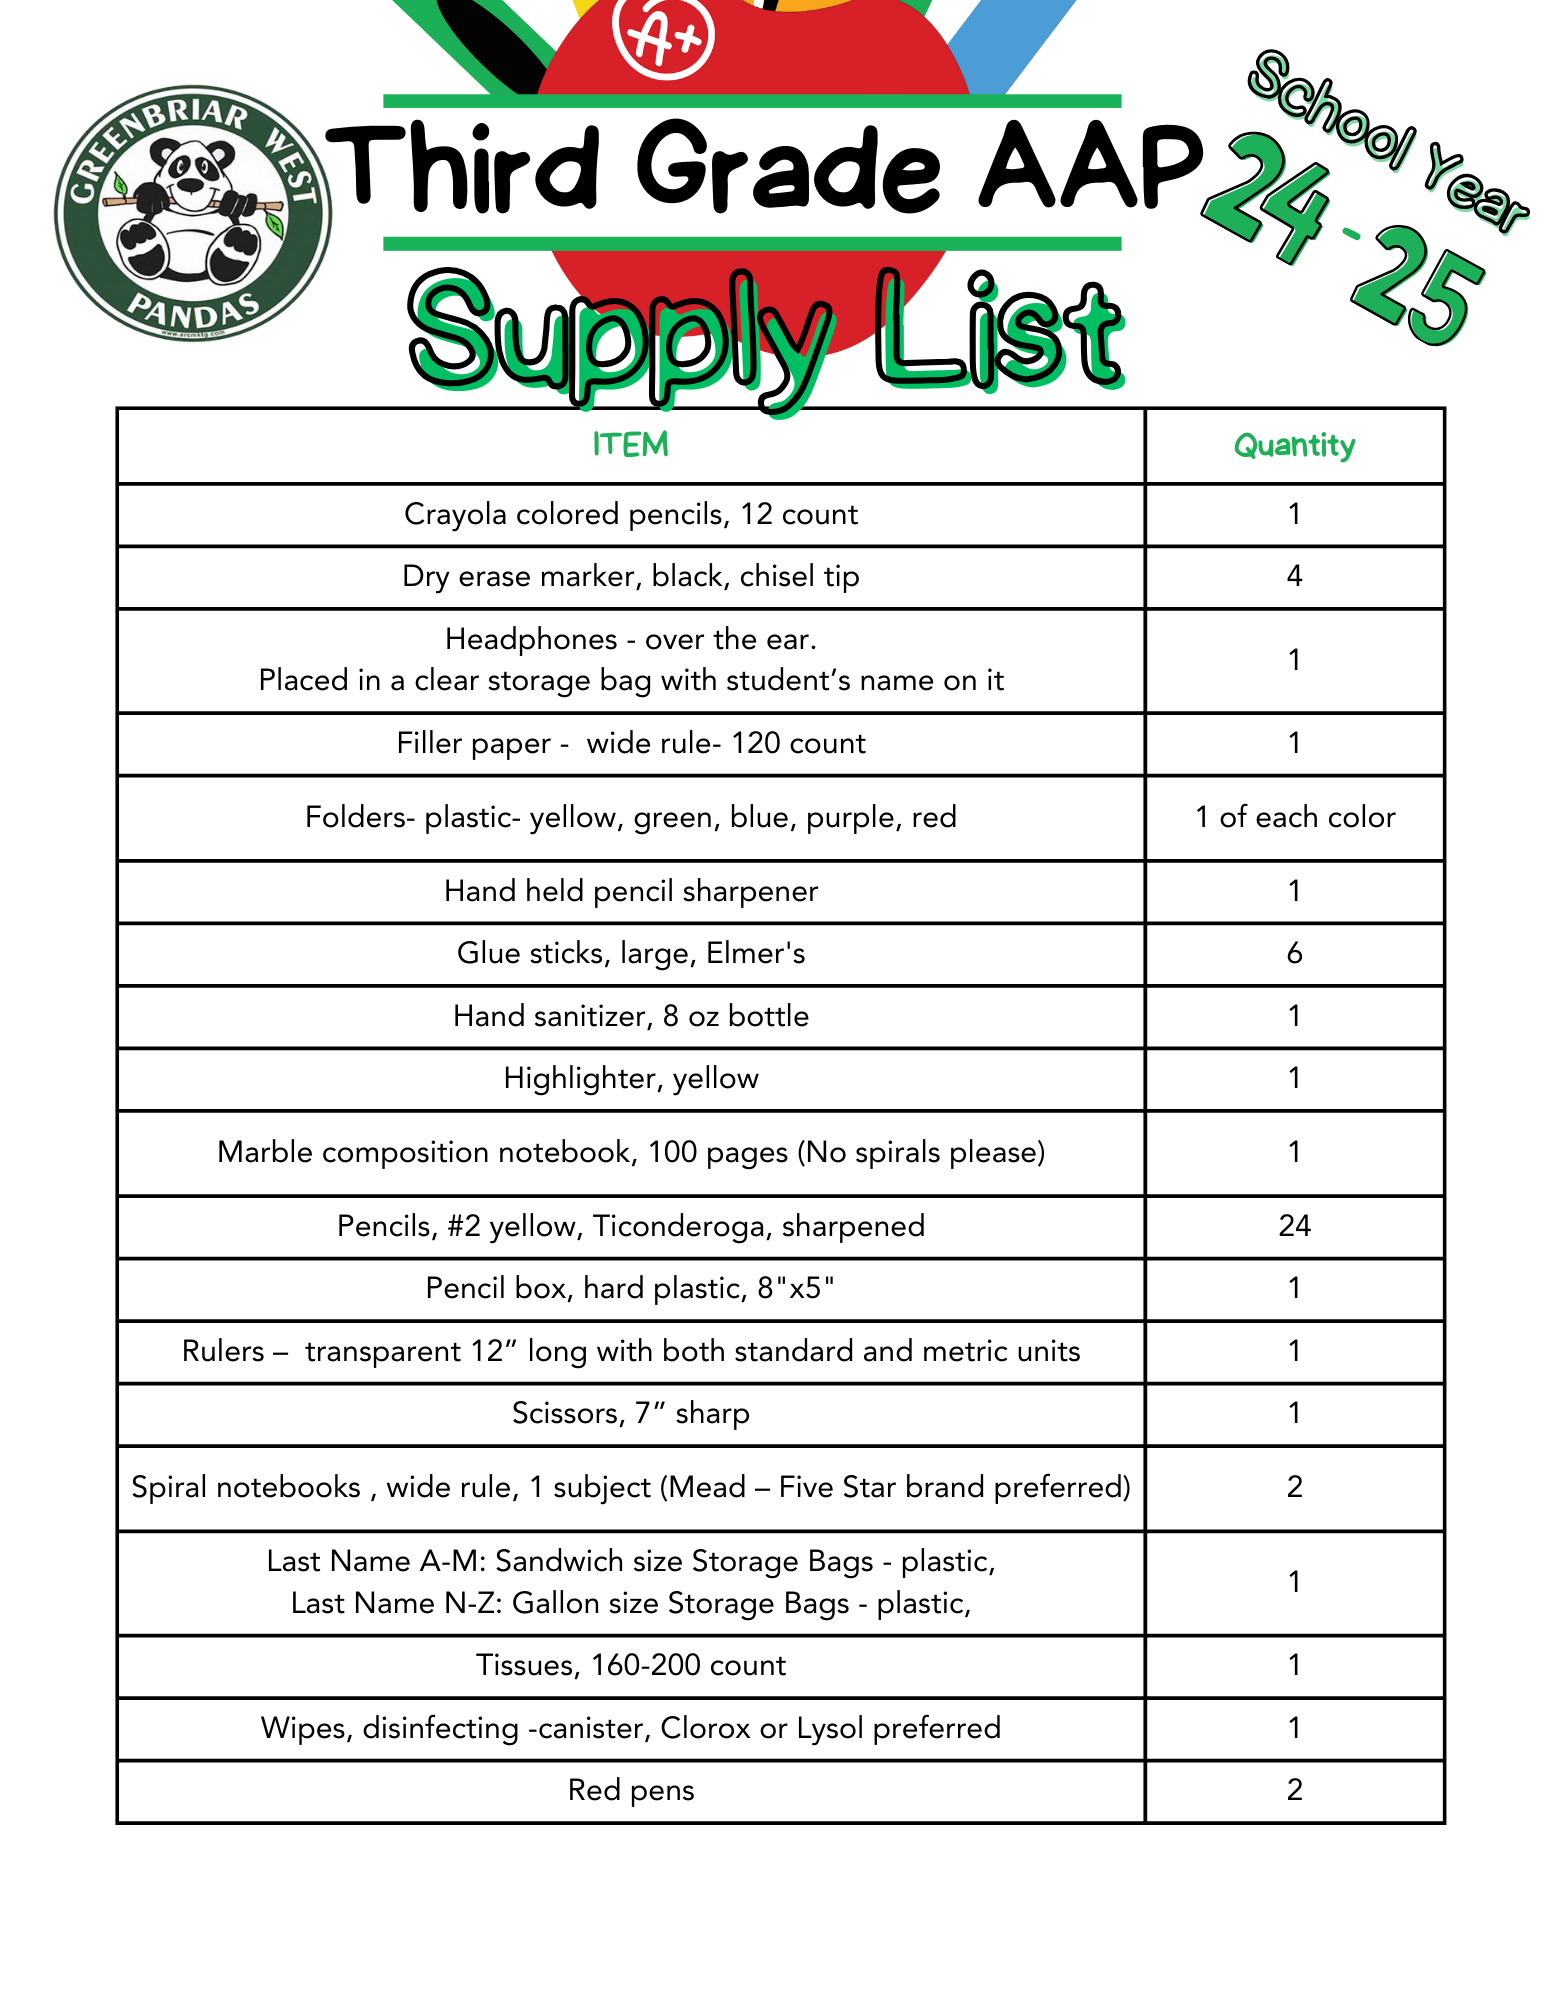 Supply list. Please contact the school